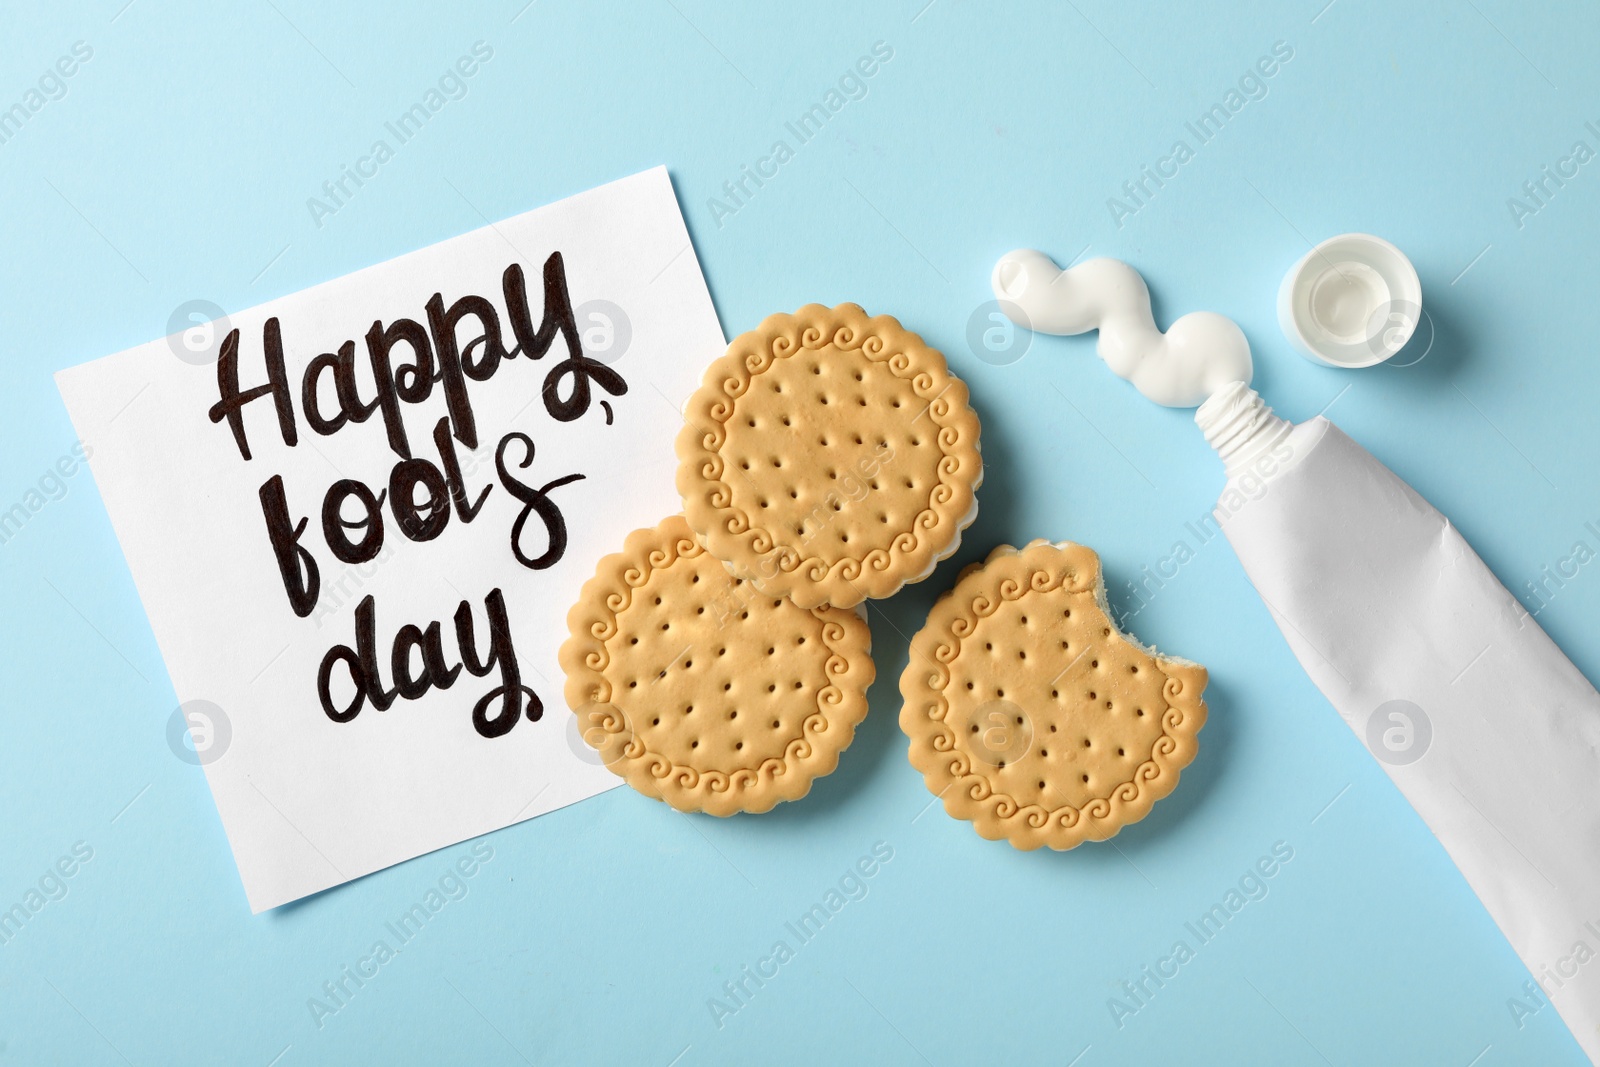 Photo of Cookies with toothpaste and Happy Fools' Day note on light blue background, flat lay